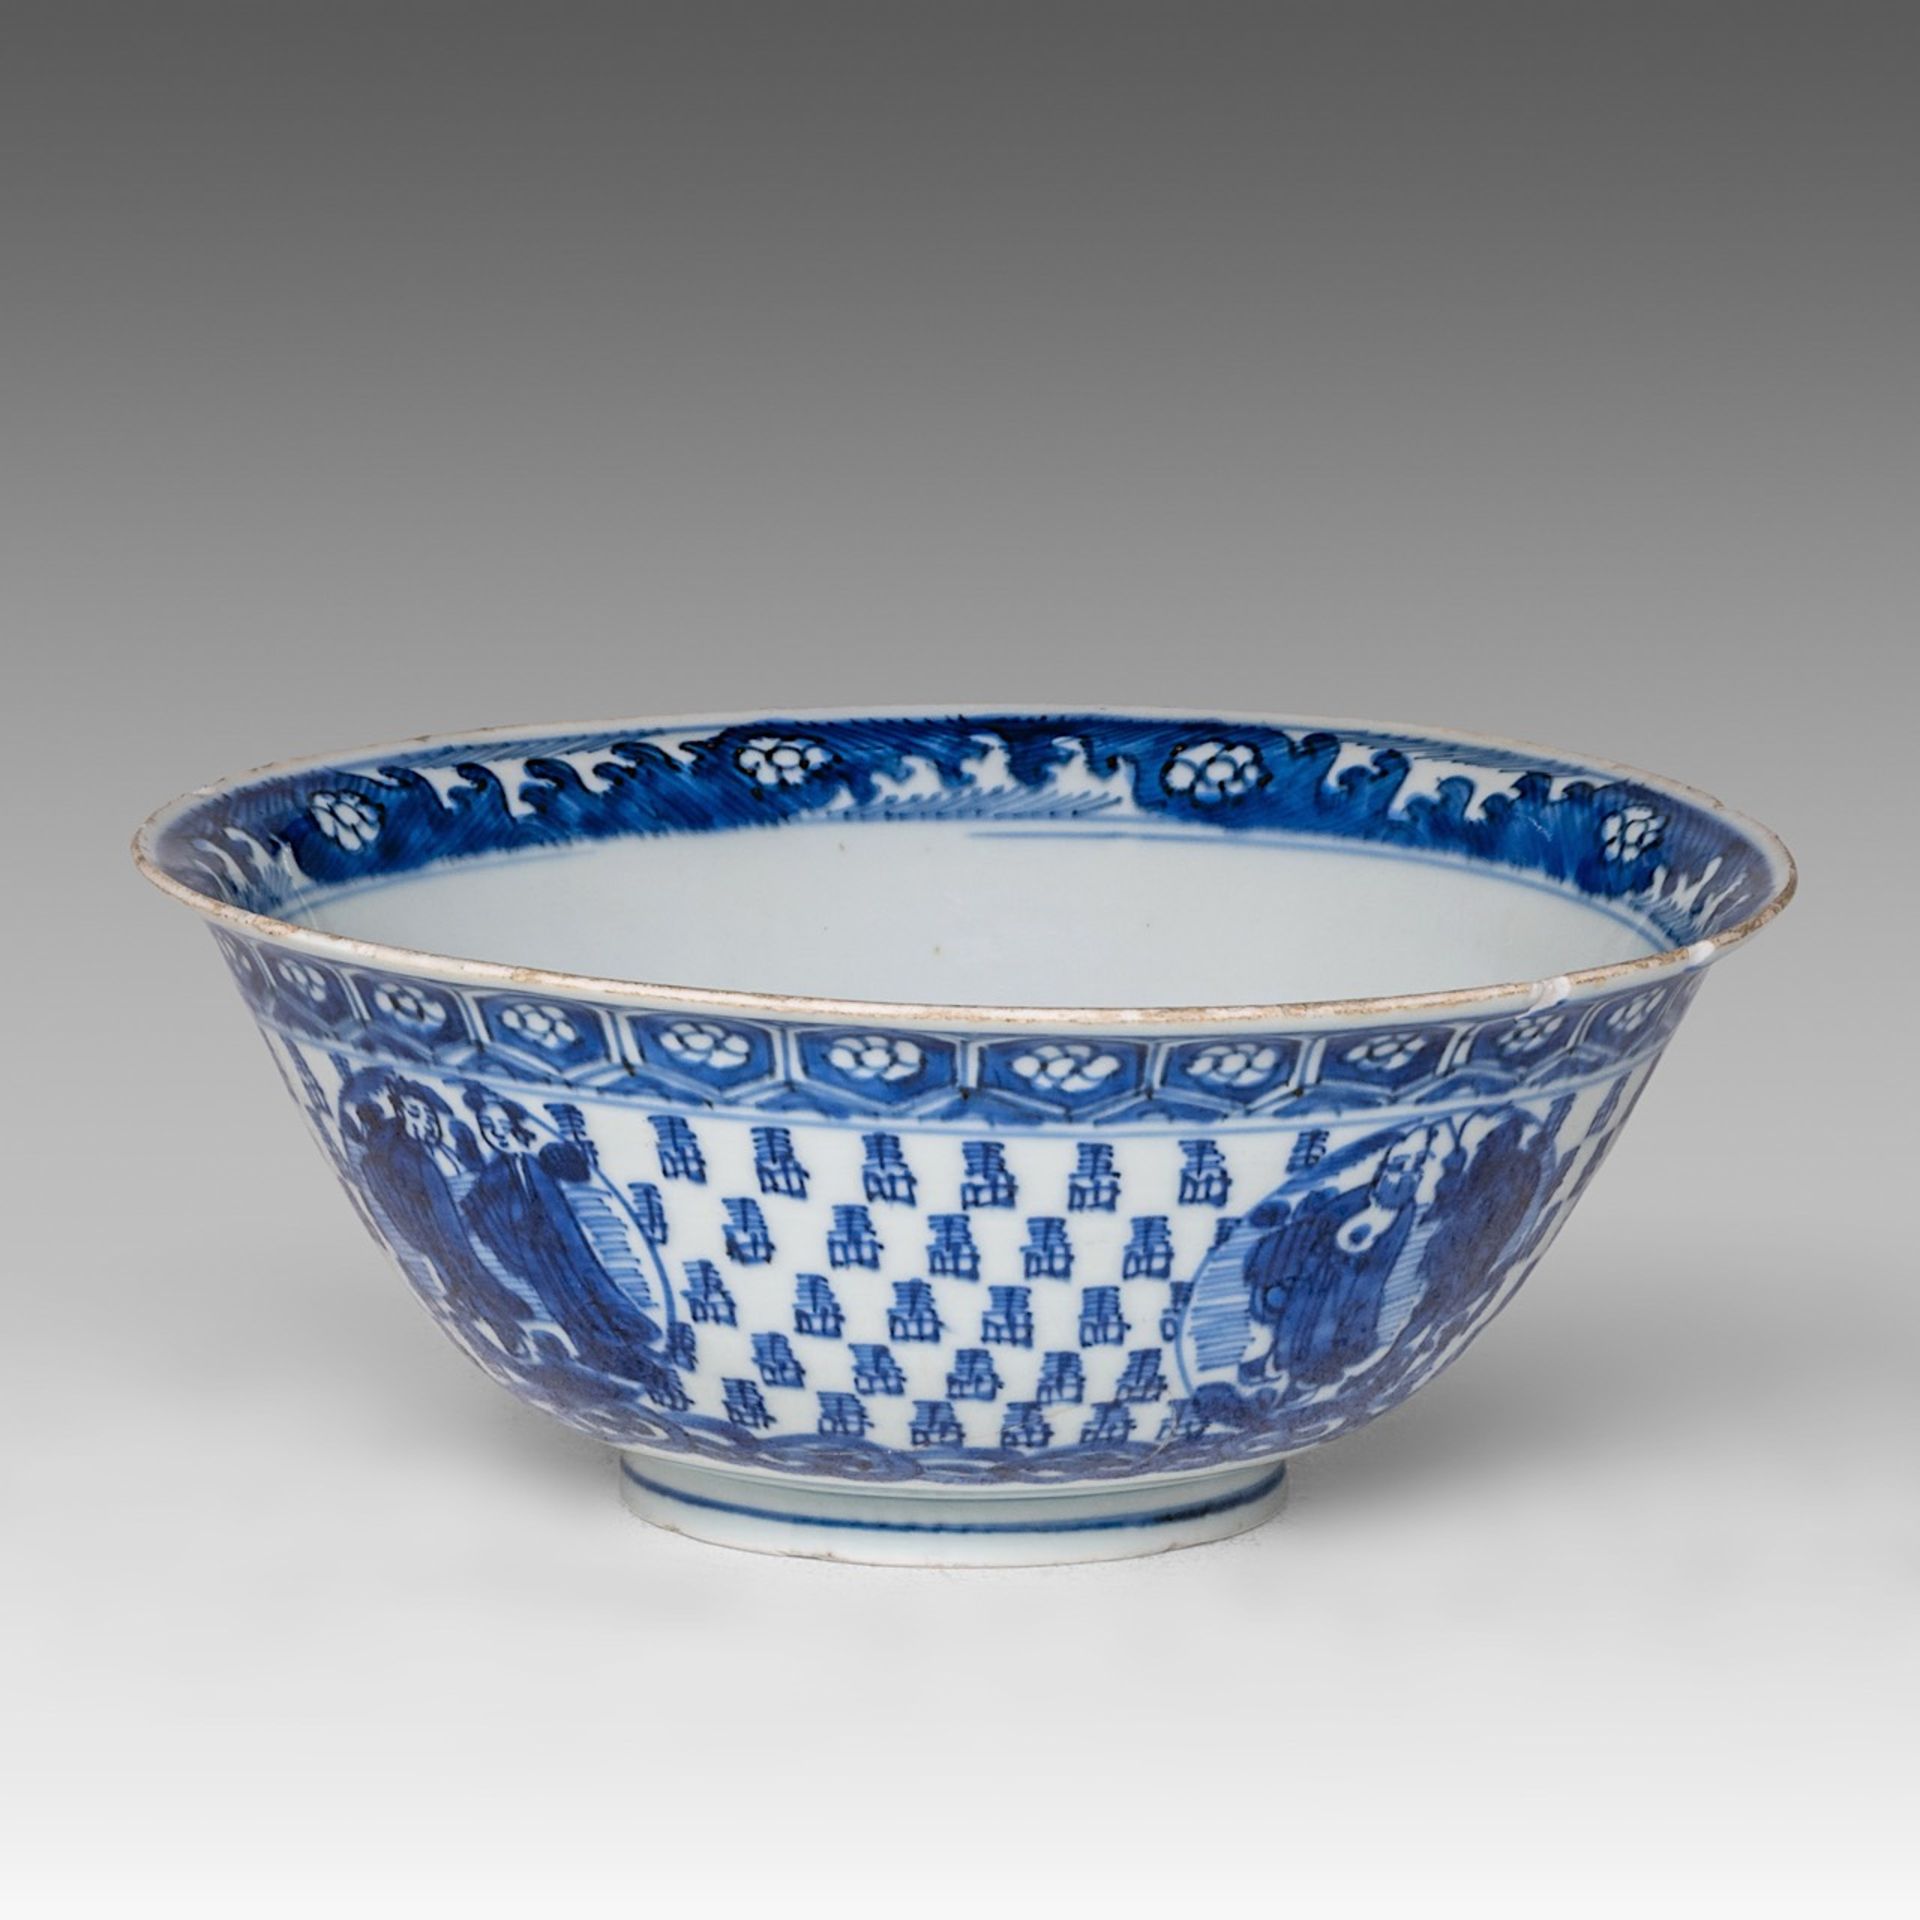 A Chinese blue and white 'Luohan' bowl, Wanli period, Ming dynasty, H 9 - dia 22,5 cm - Image 5 of 8